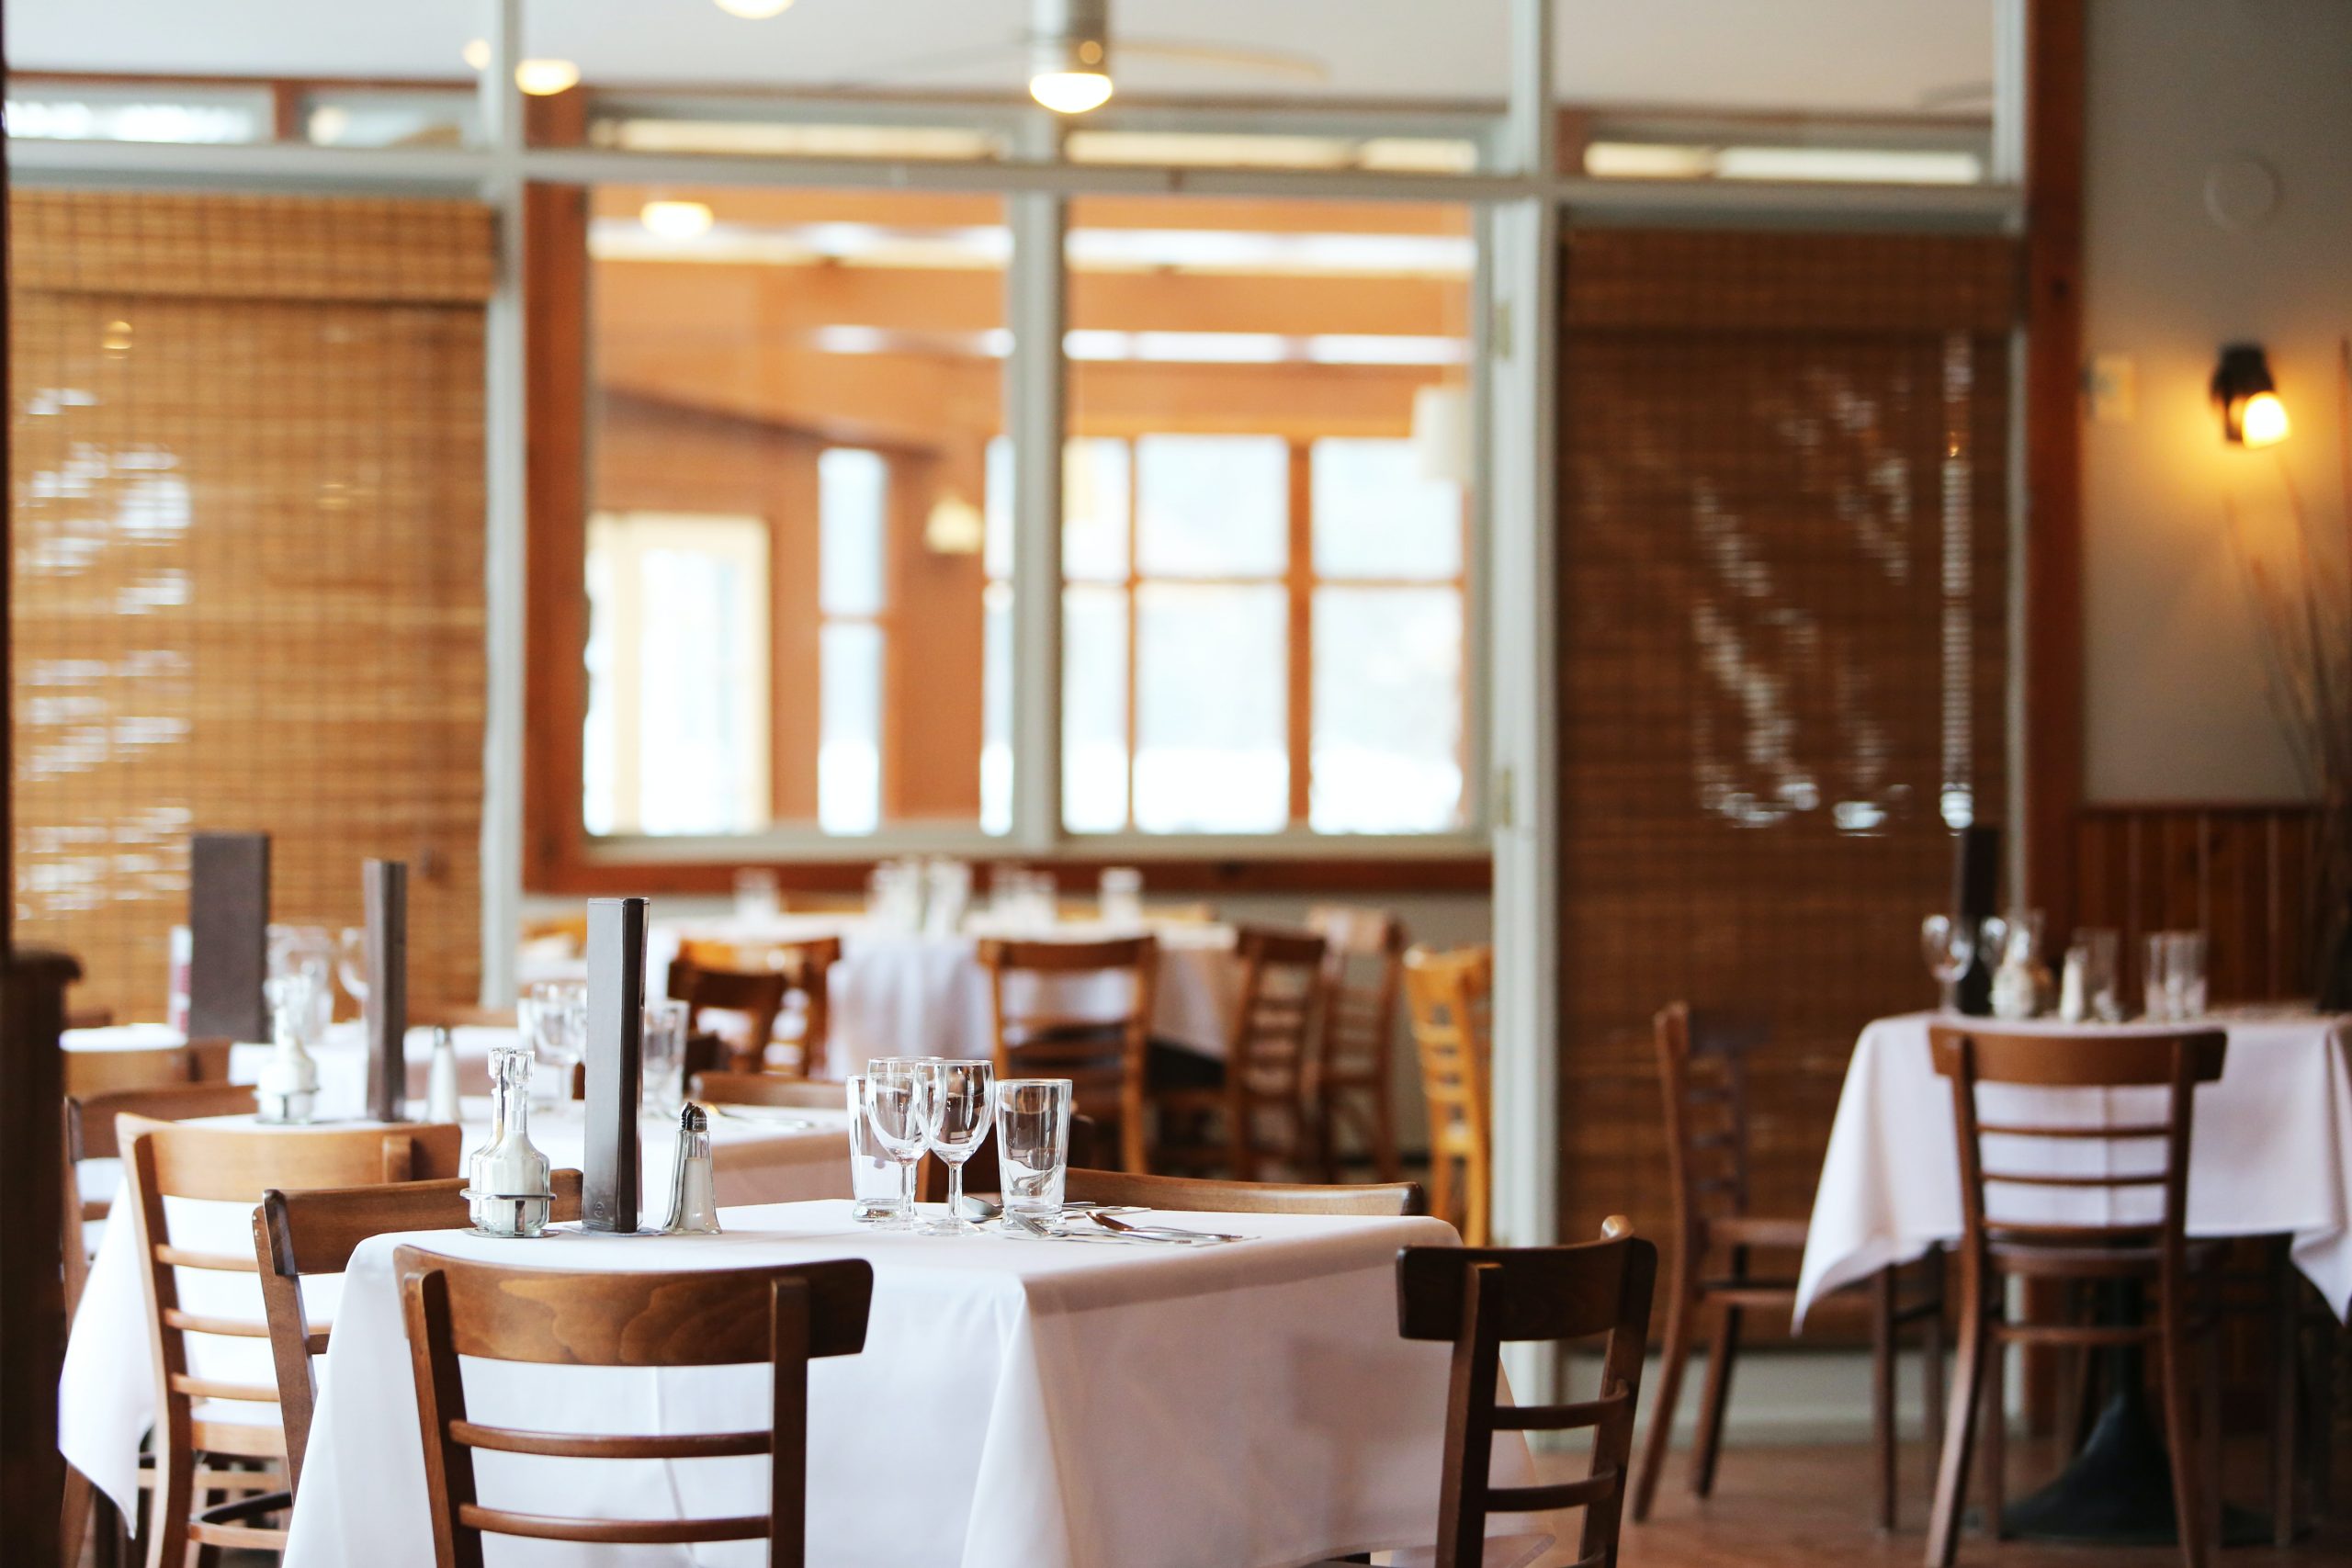 Restaurant Accounting Services in Arlington